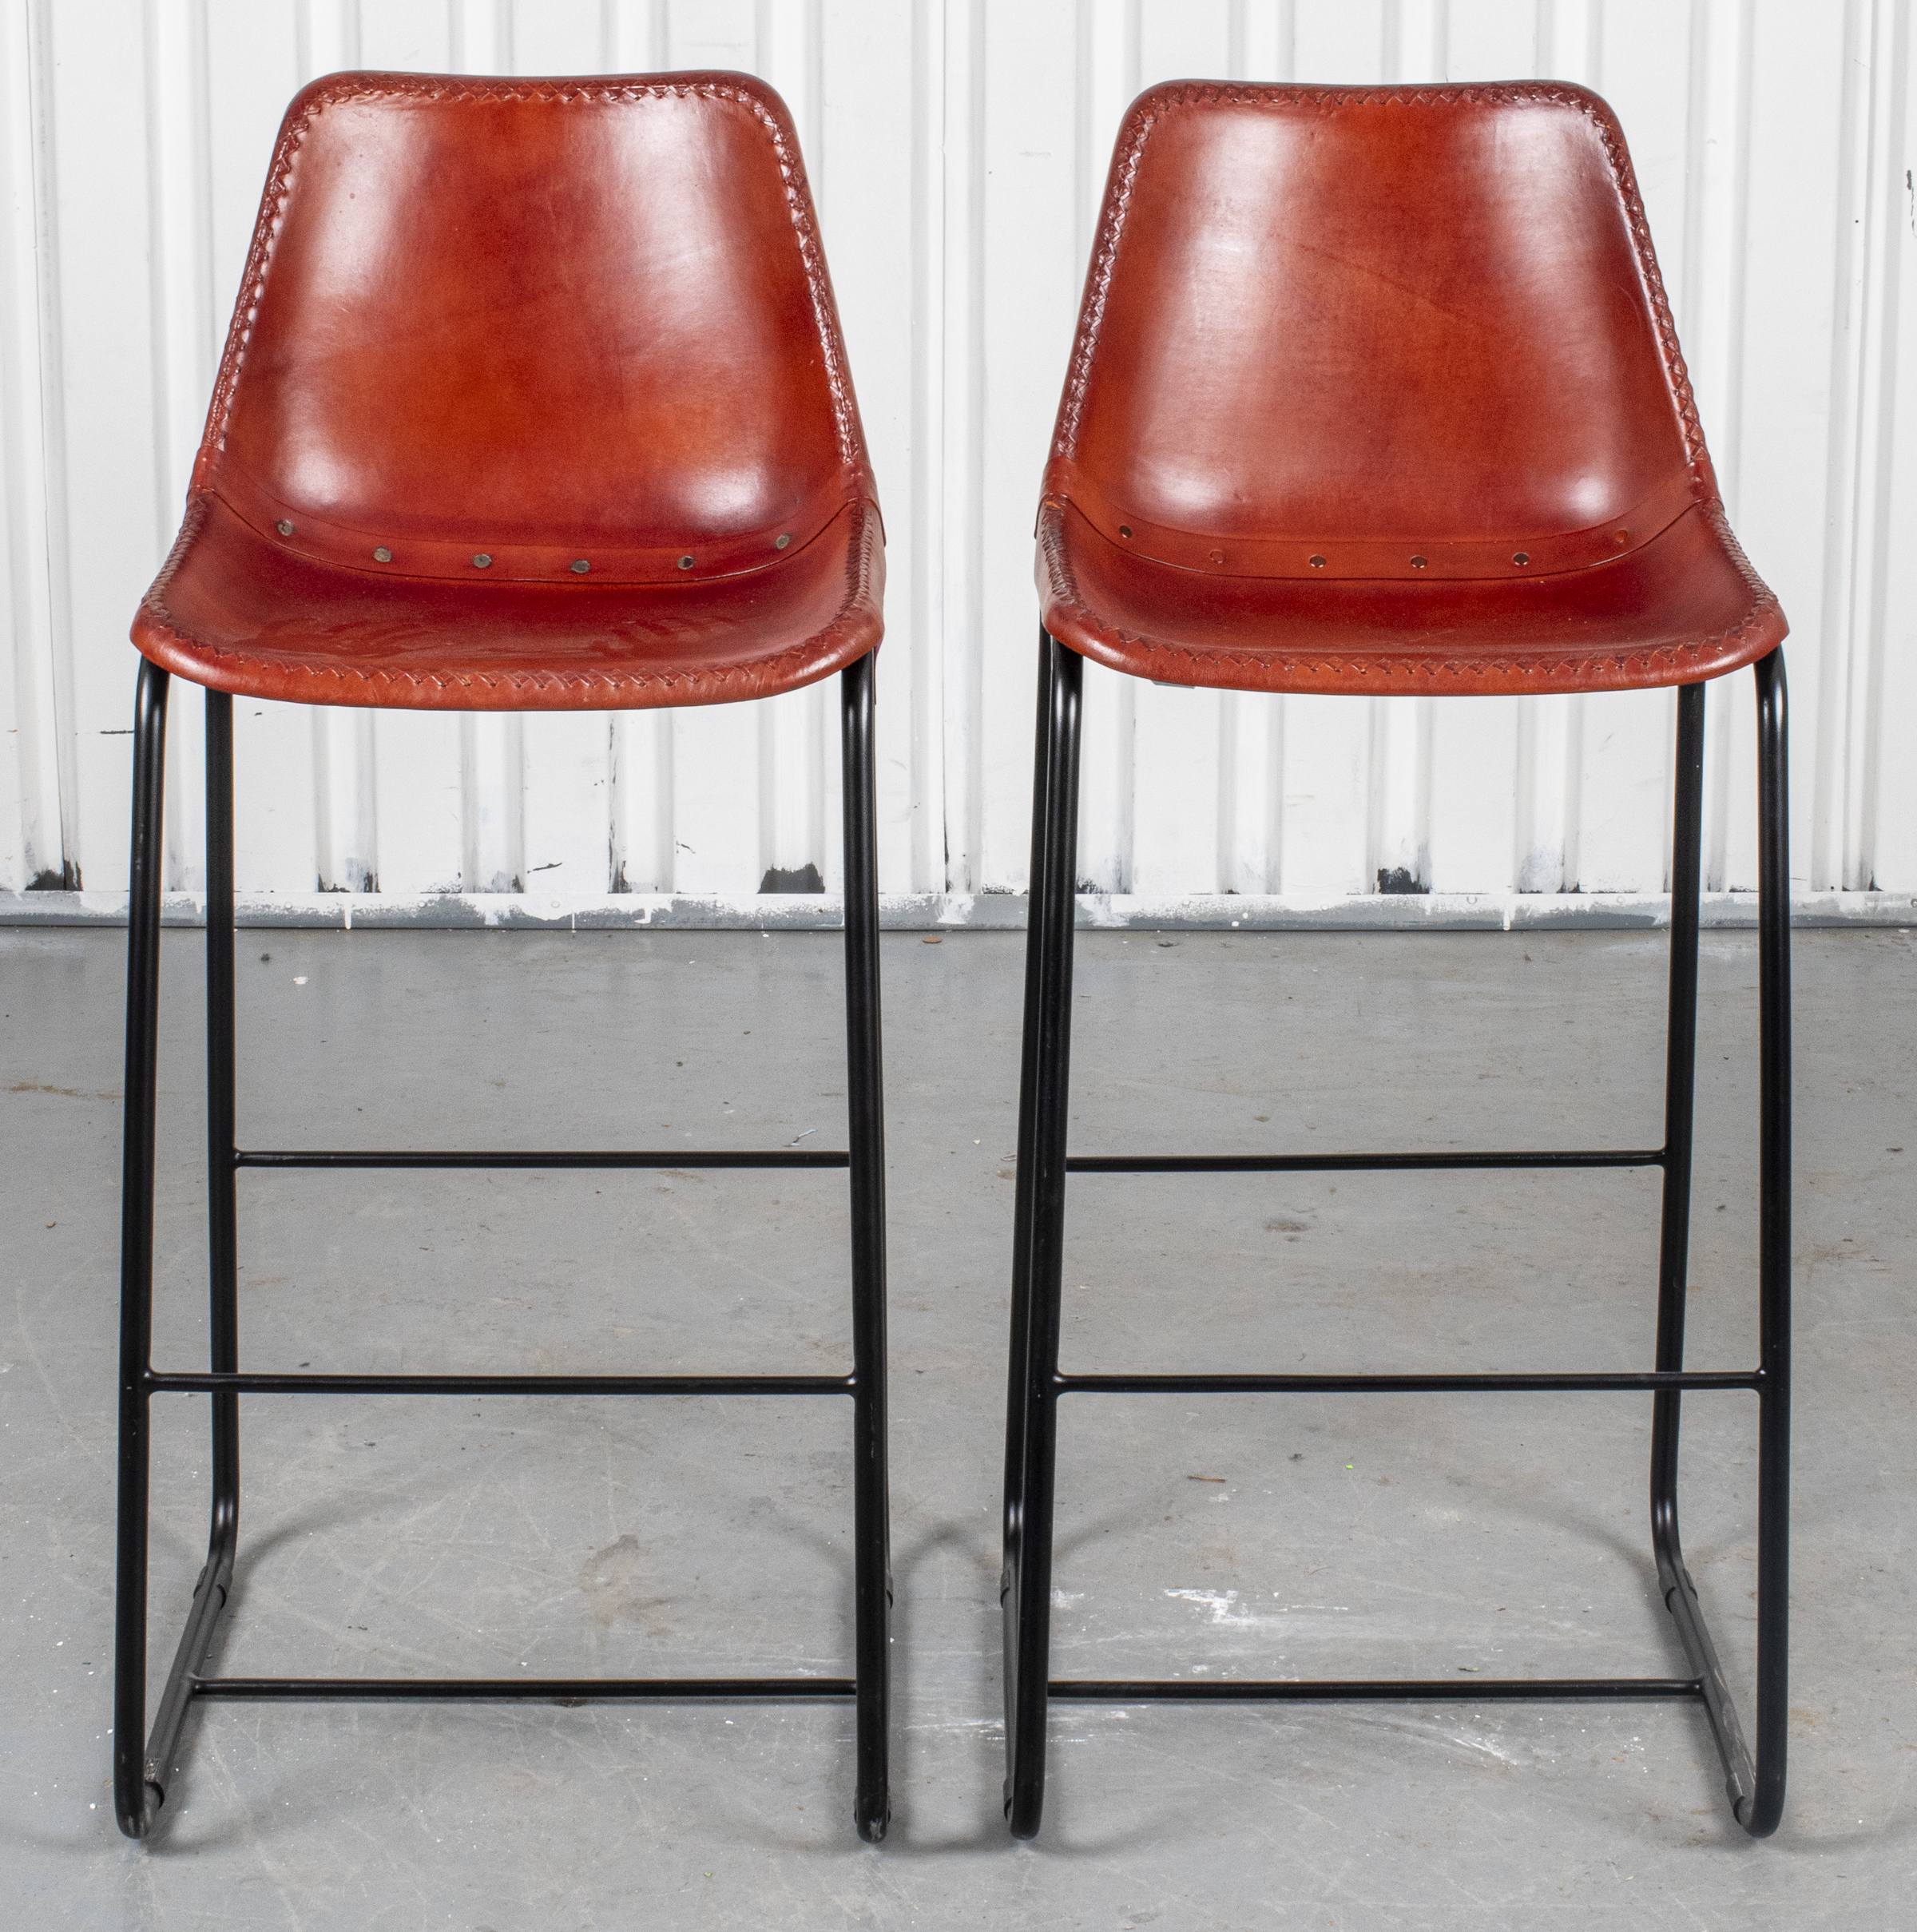 LEATHER UPHOLSTERED TALL STOOLS,